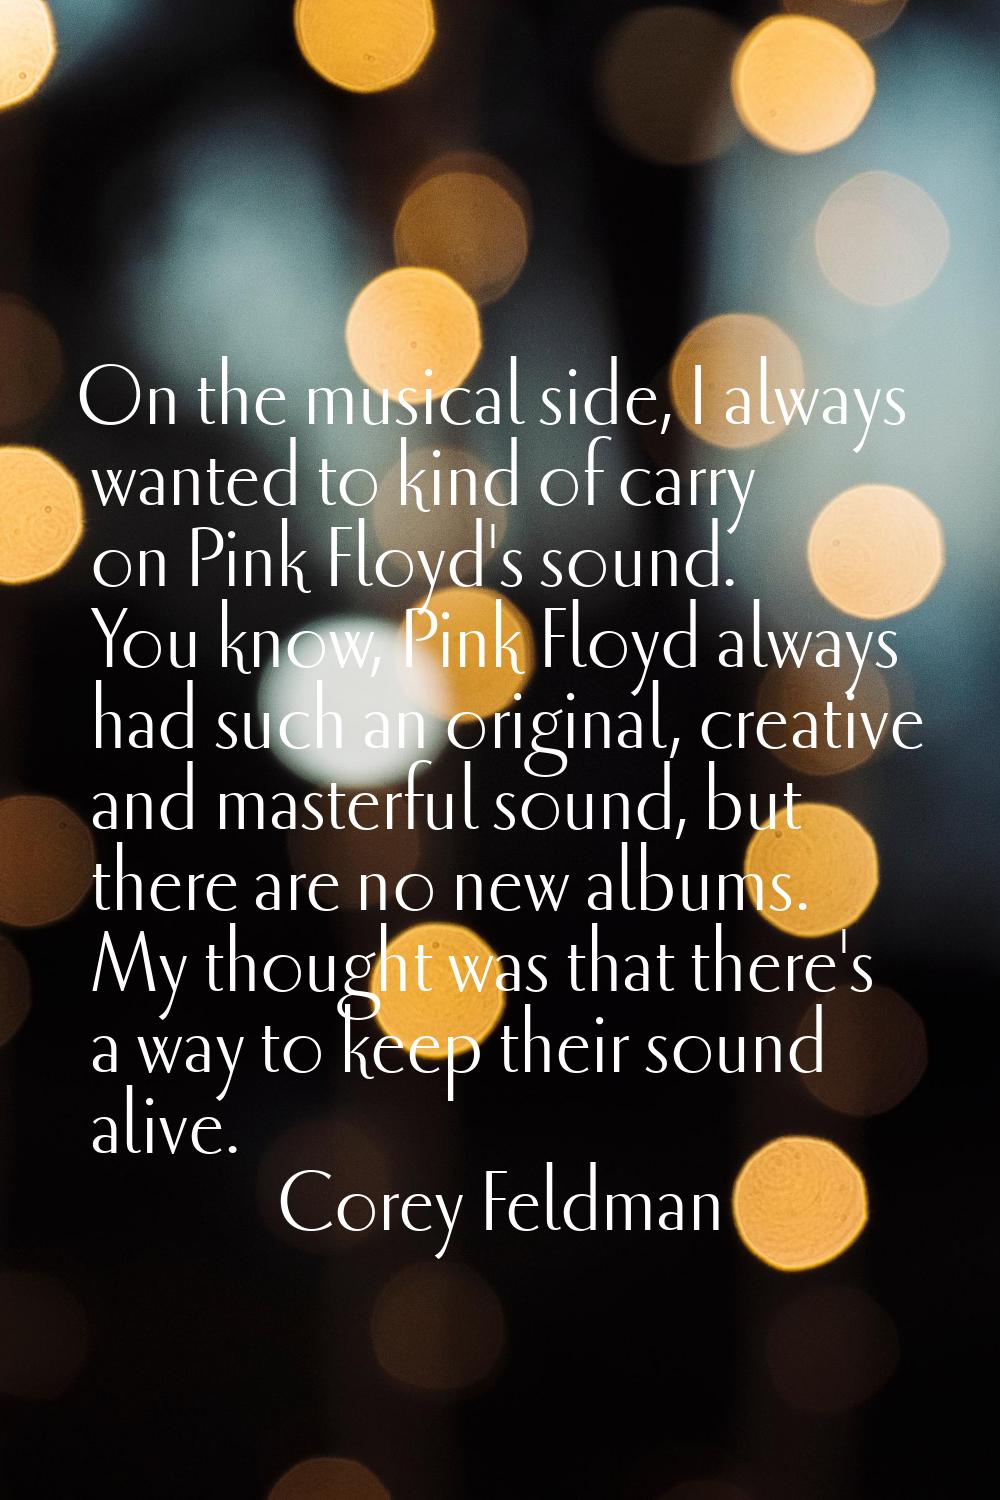 On the musical side, I always wanted to kind of carry on Pink Floyd's sound. You know, Pink Floyd a